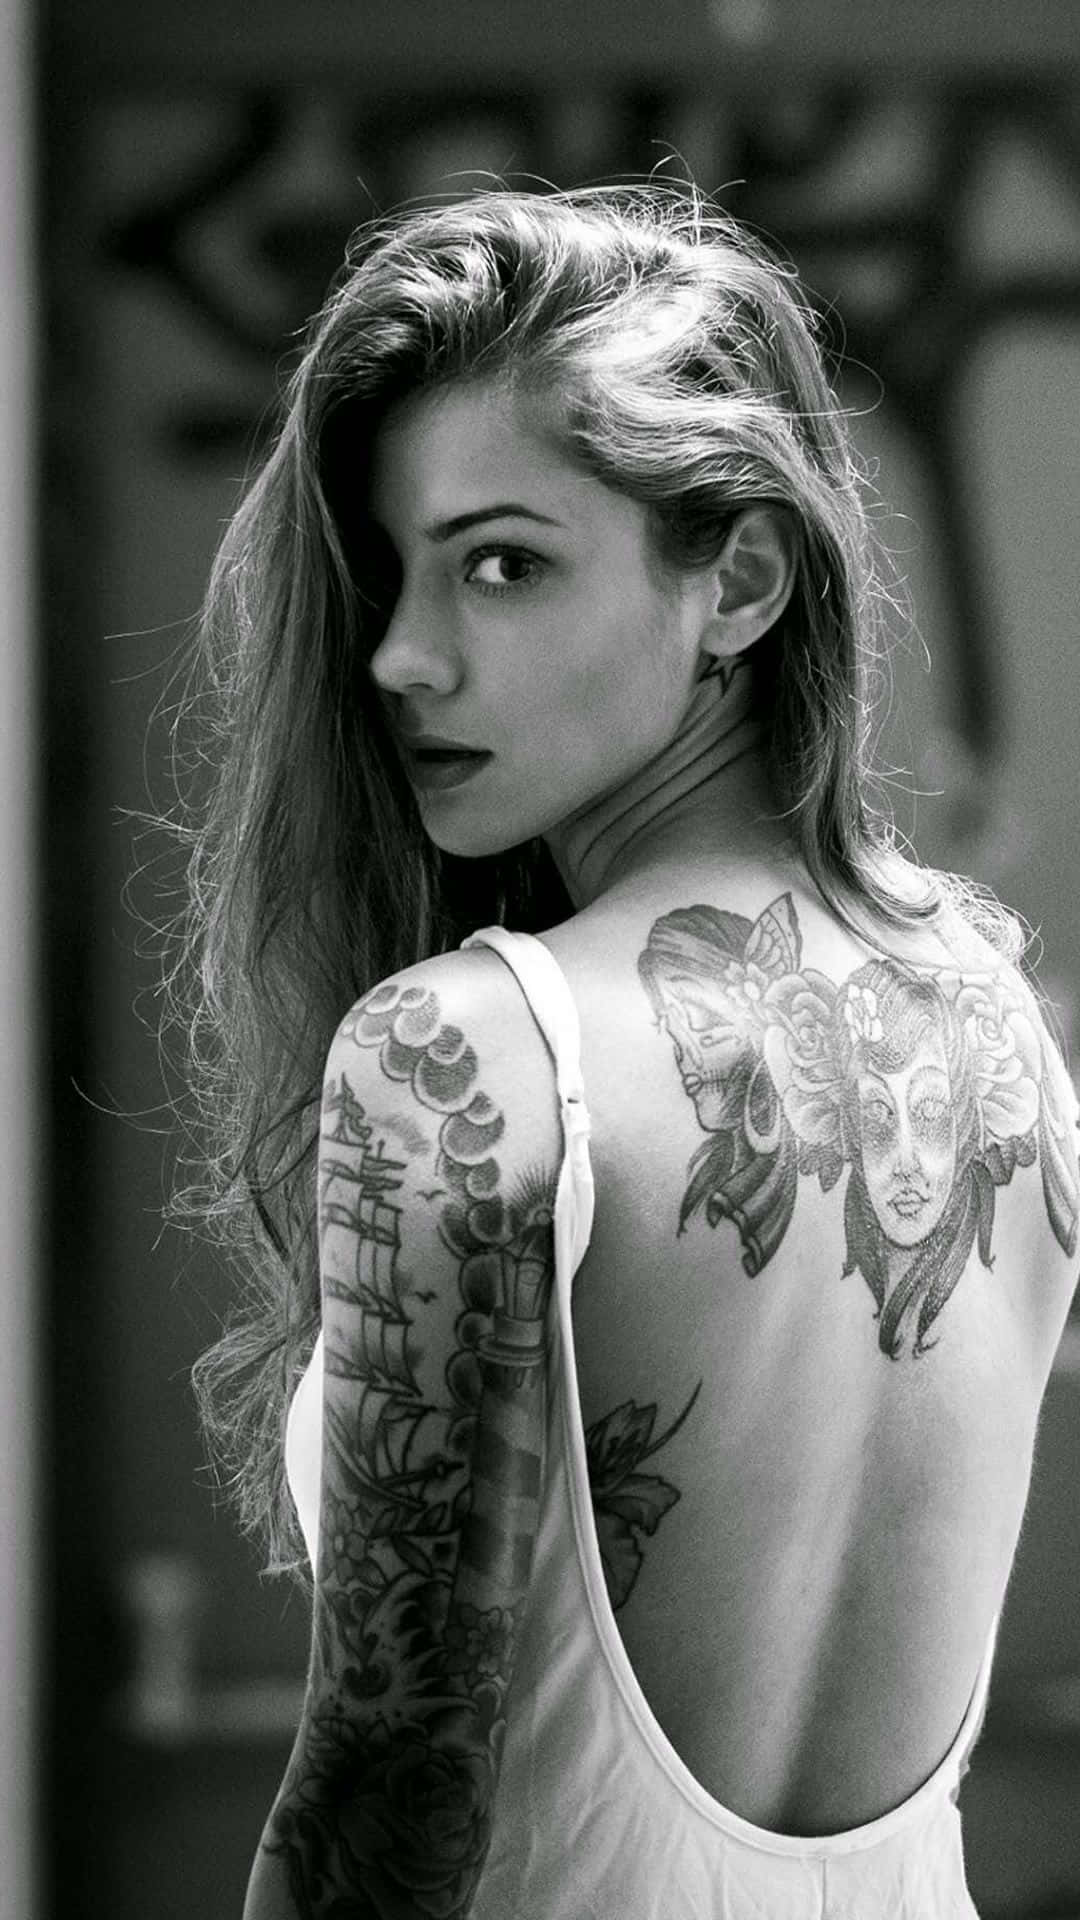 A Woman With Tattoos On Her Back